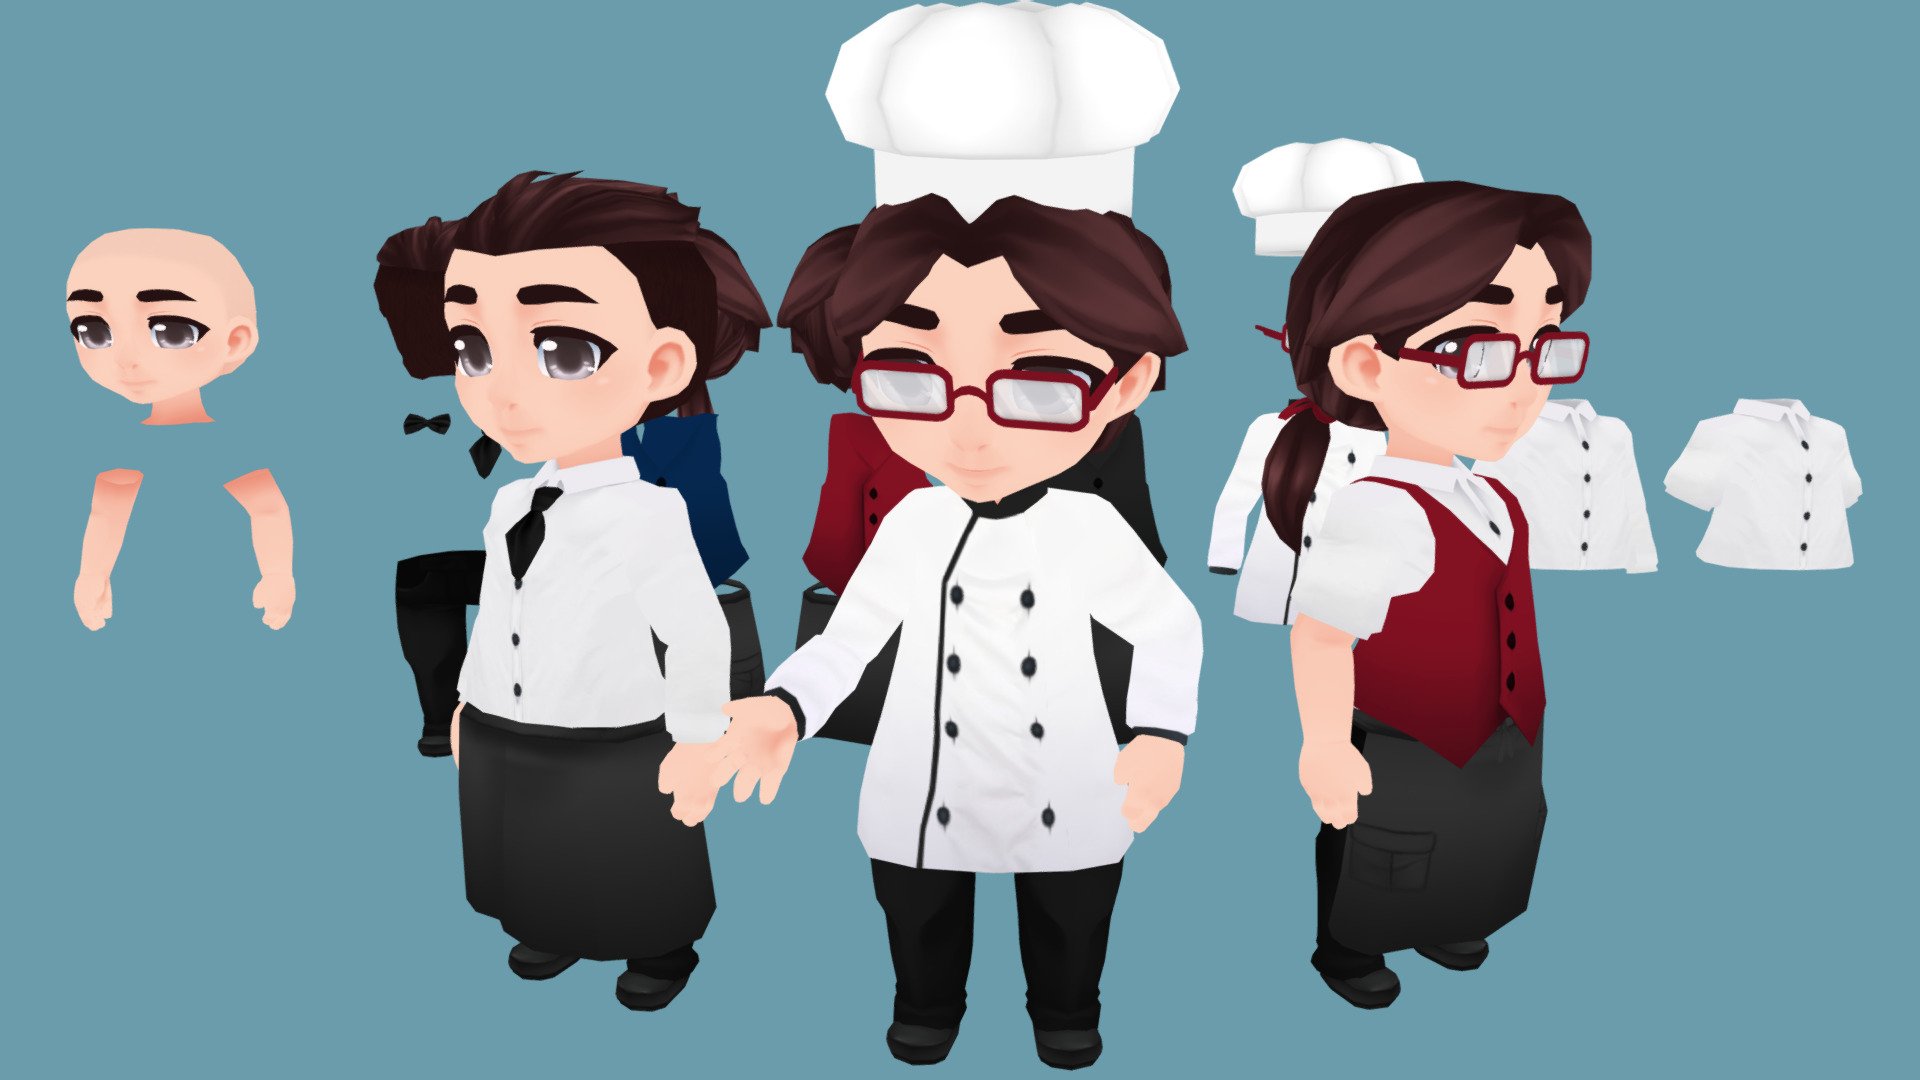 Chibi Chef - 3D model by ChristineDesigns 3d model